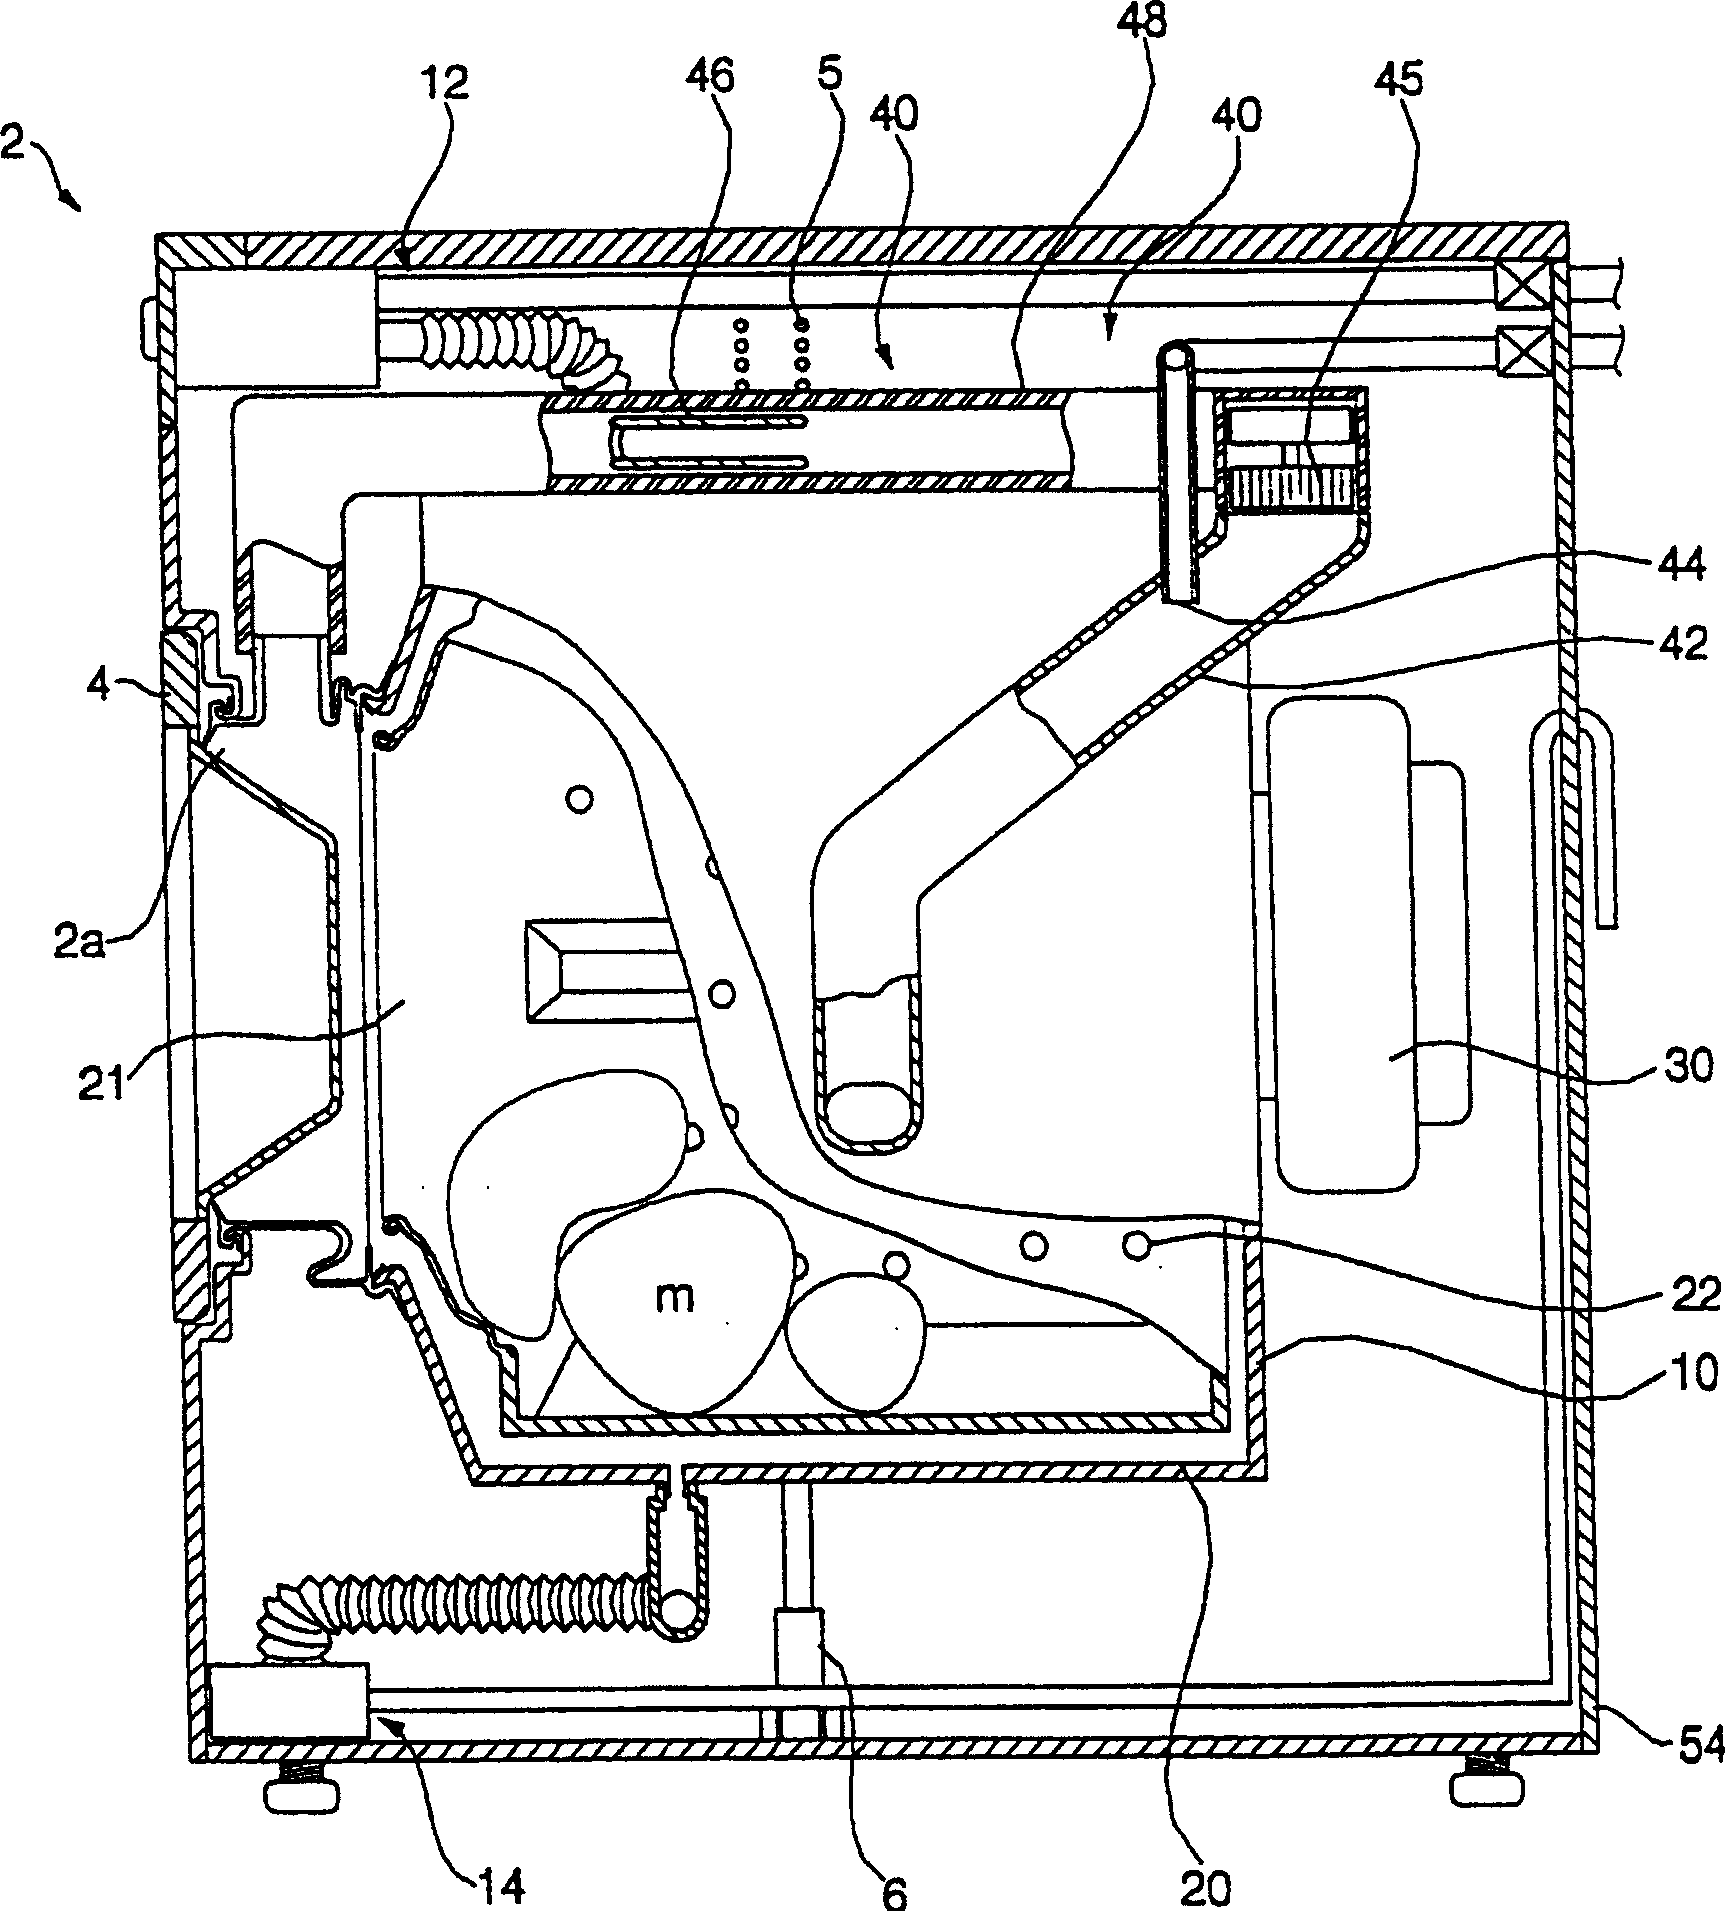 Method for controlling dehydration of washing machine